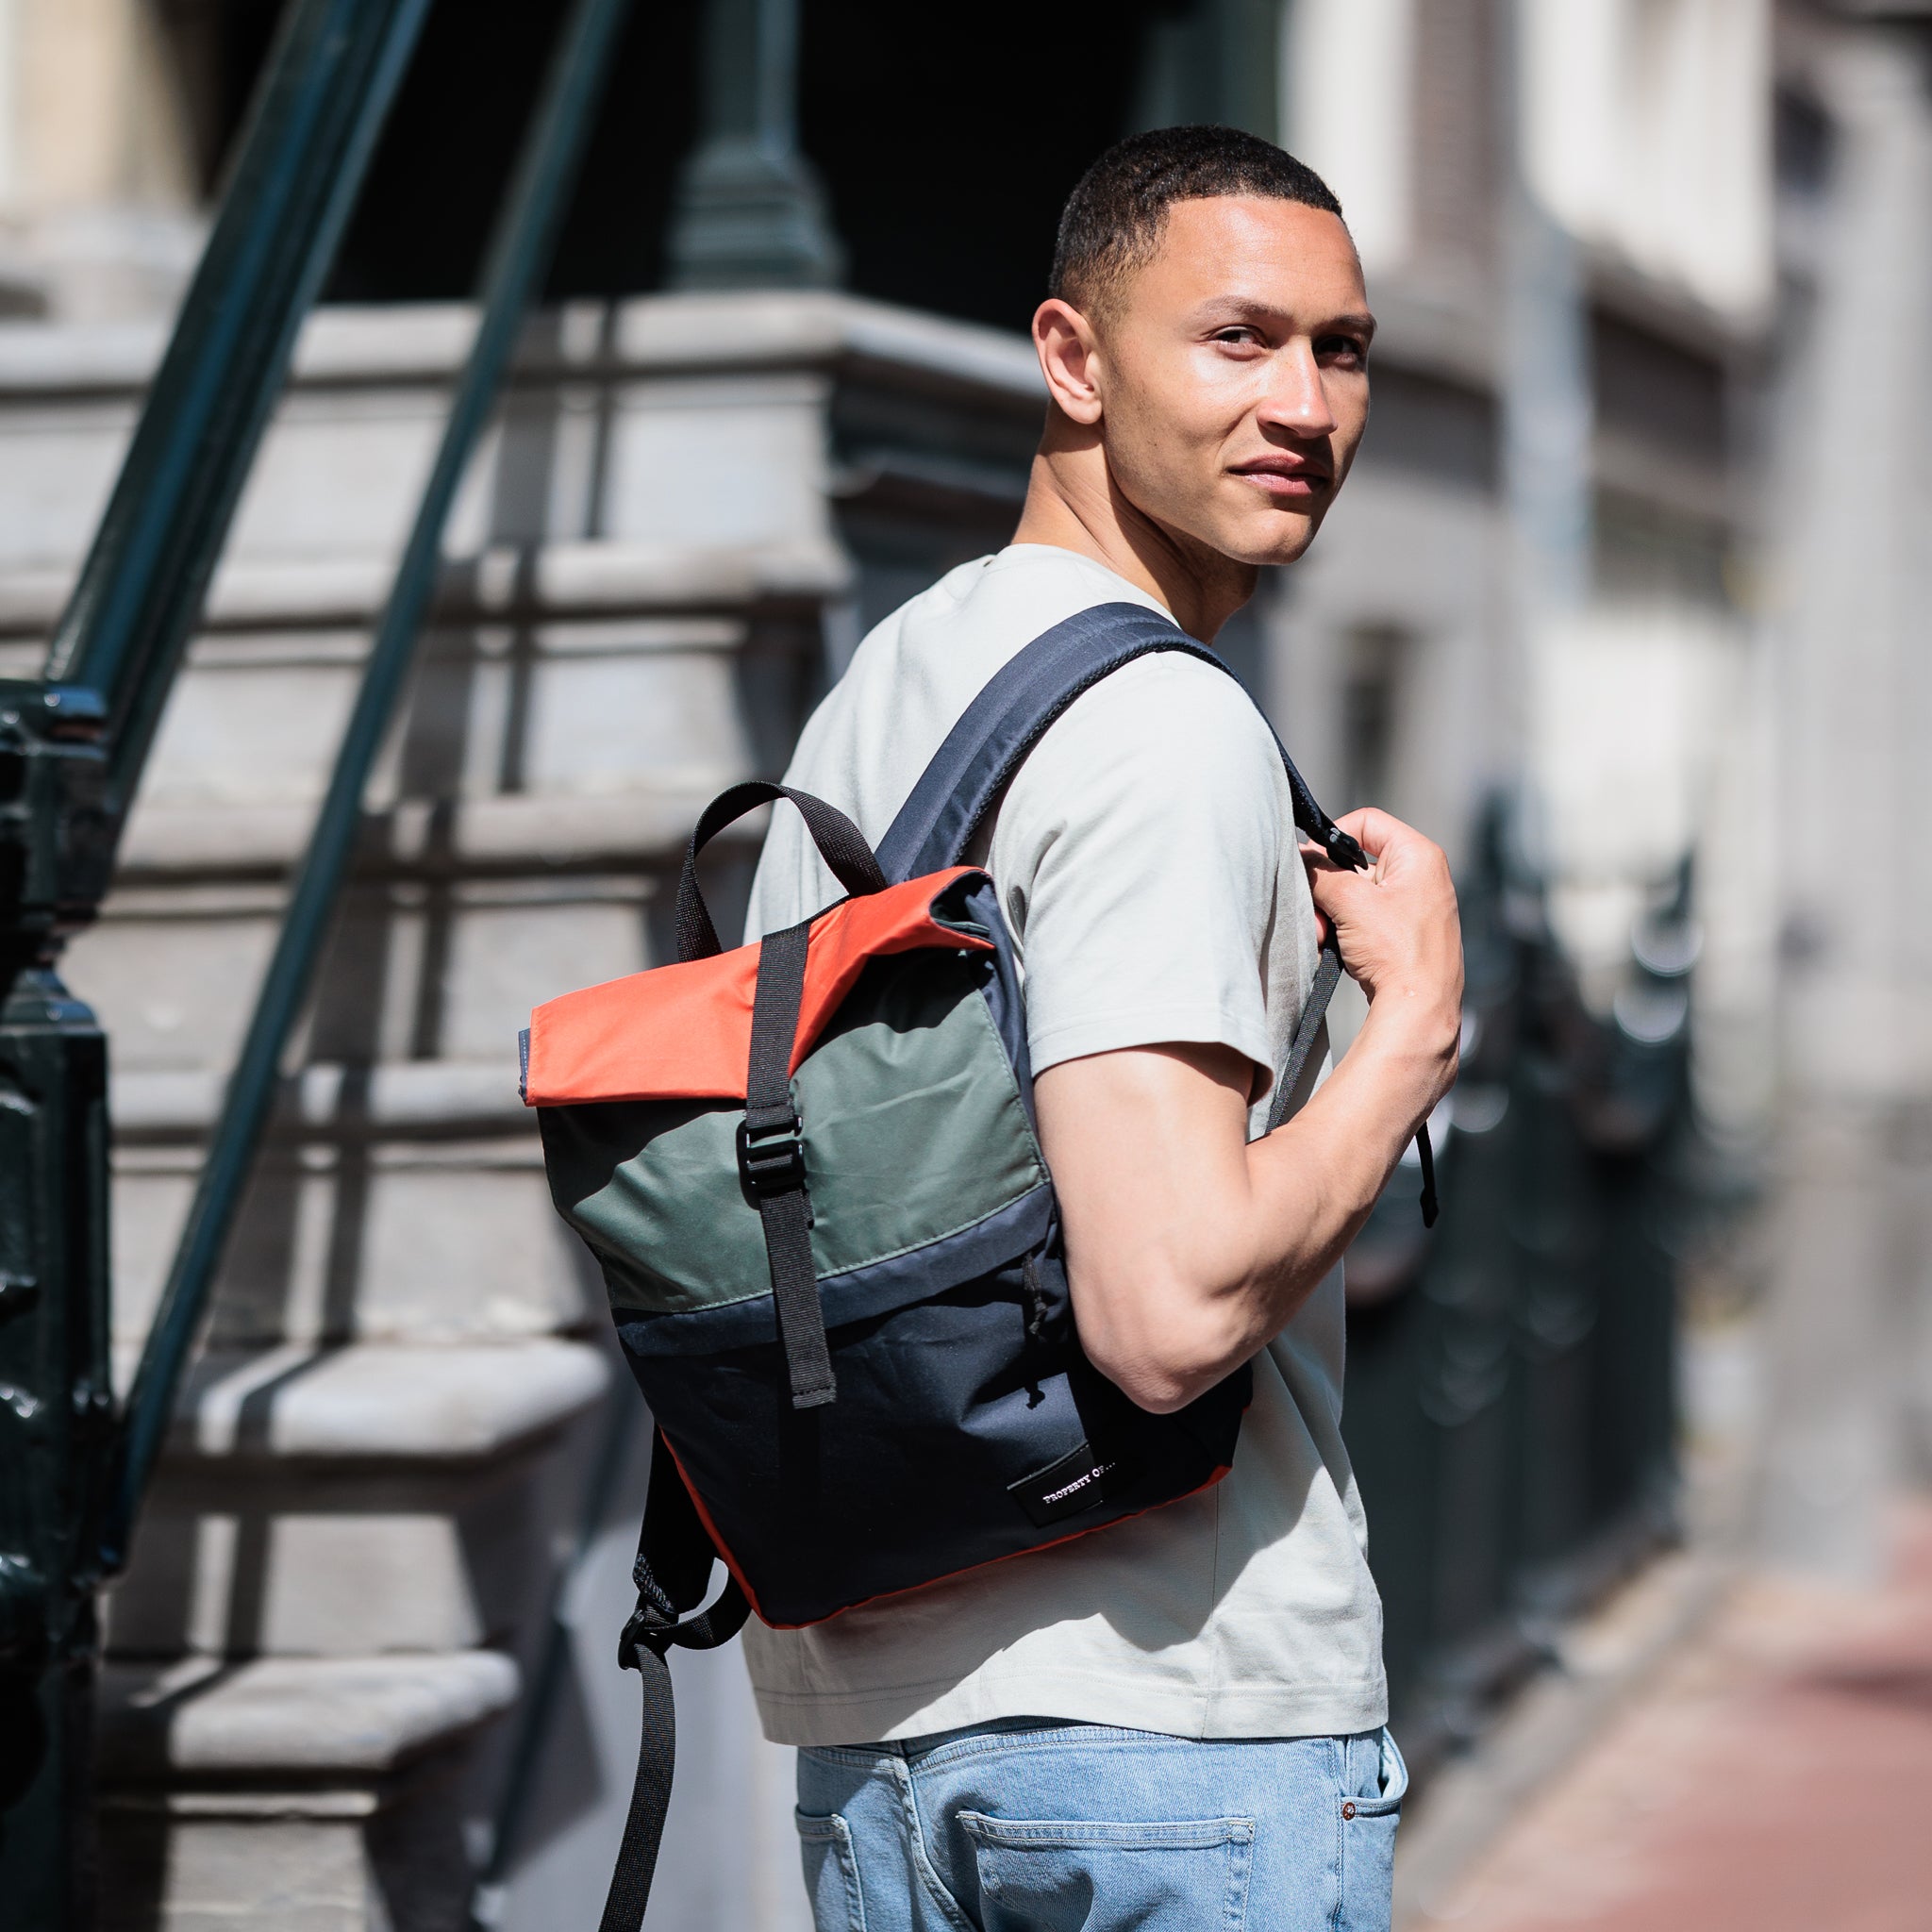 Bobby Small Foldable Backpack